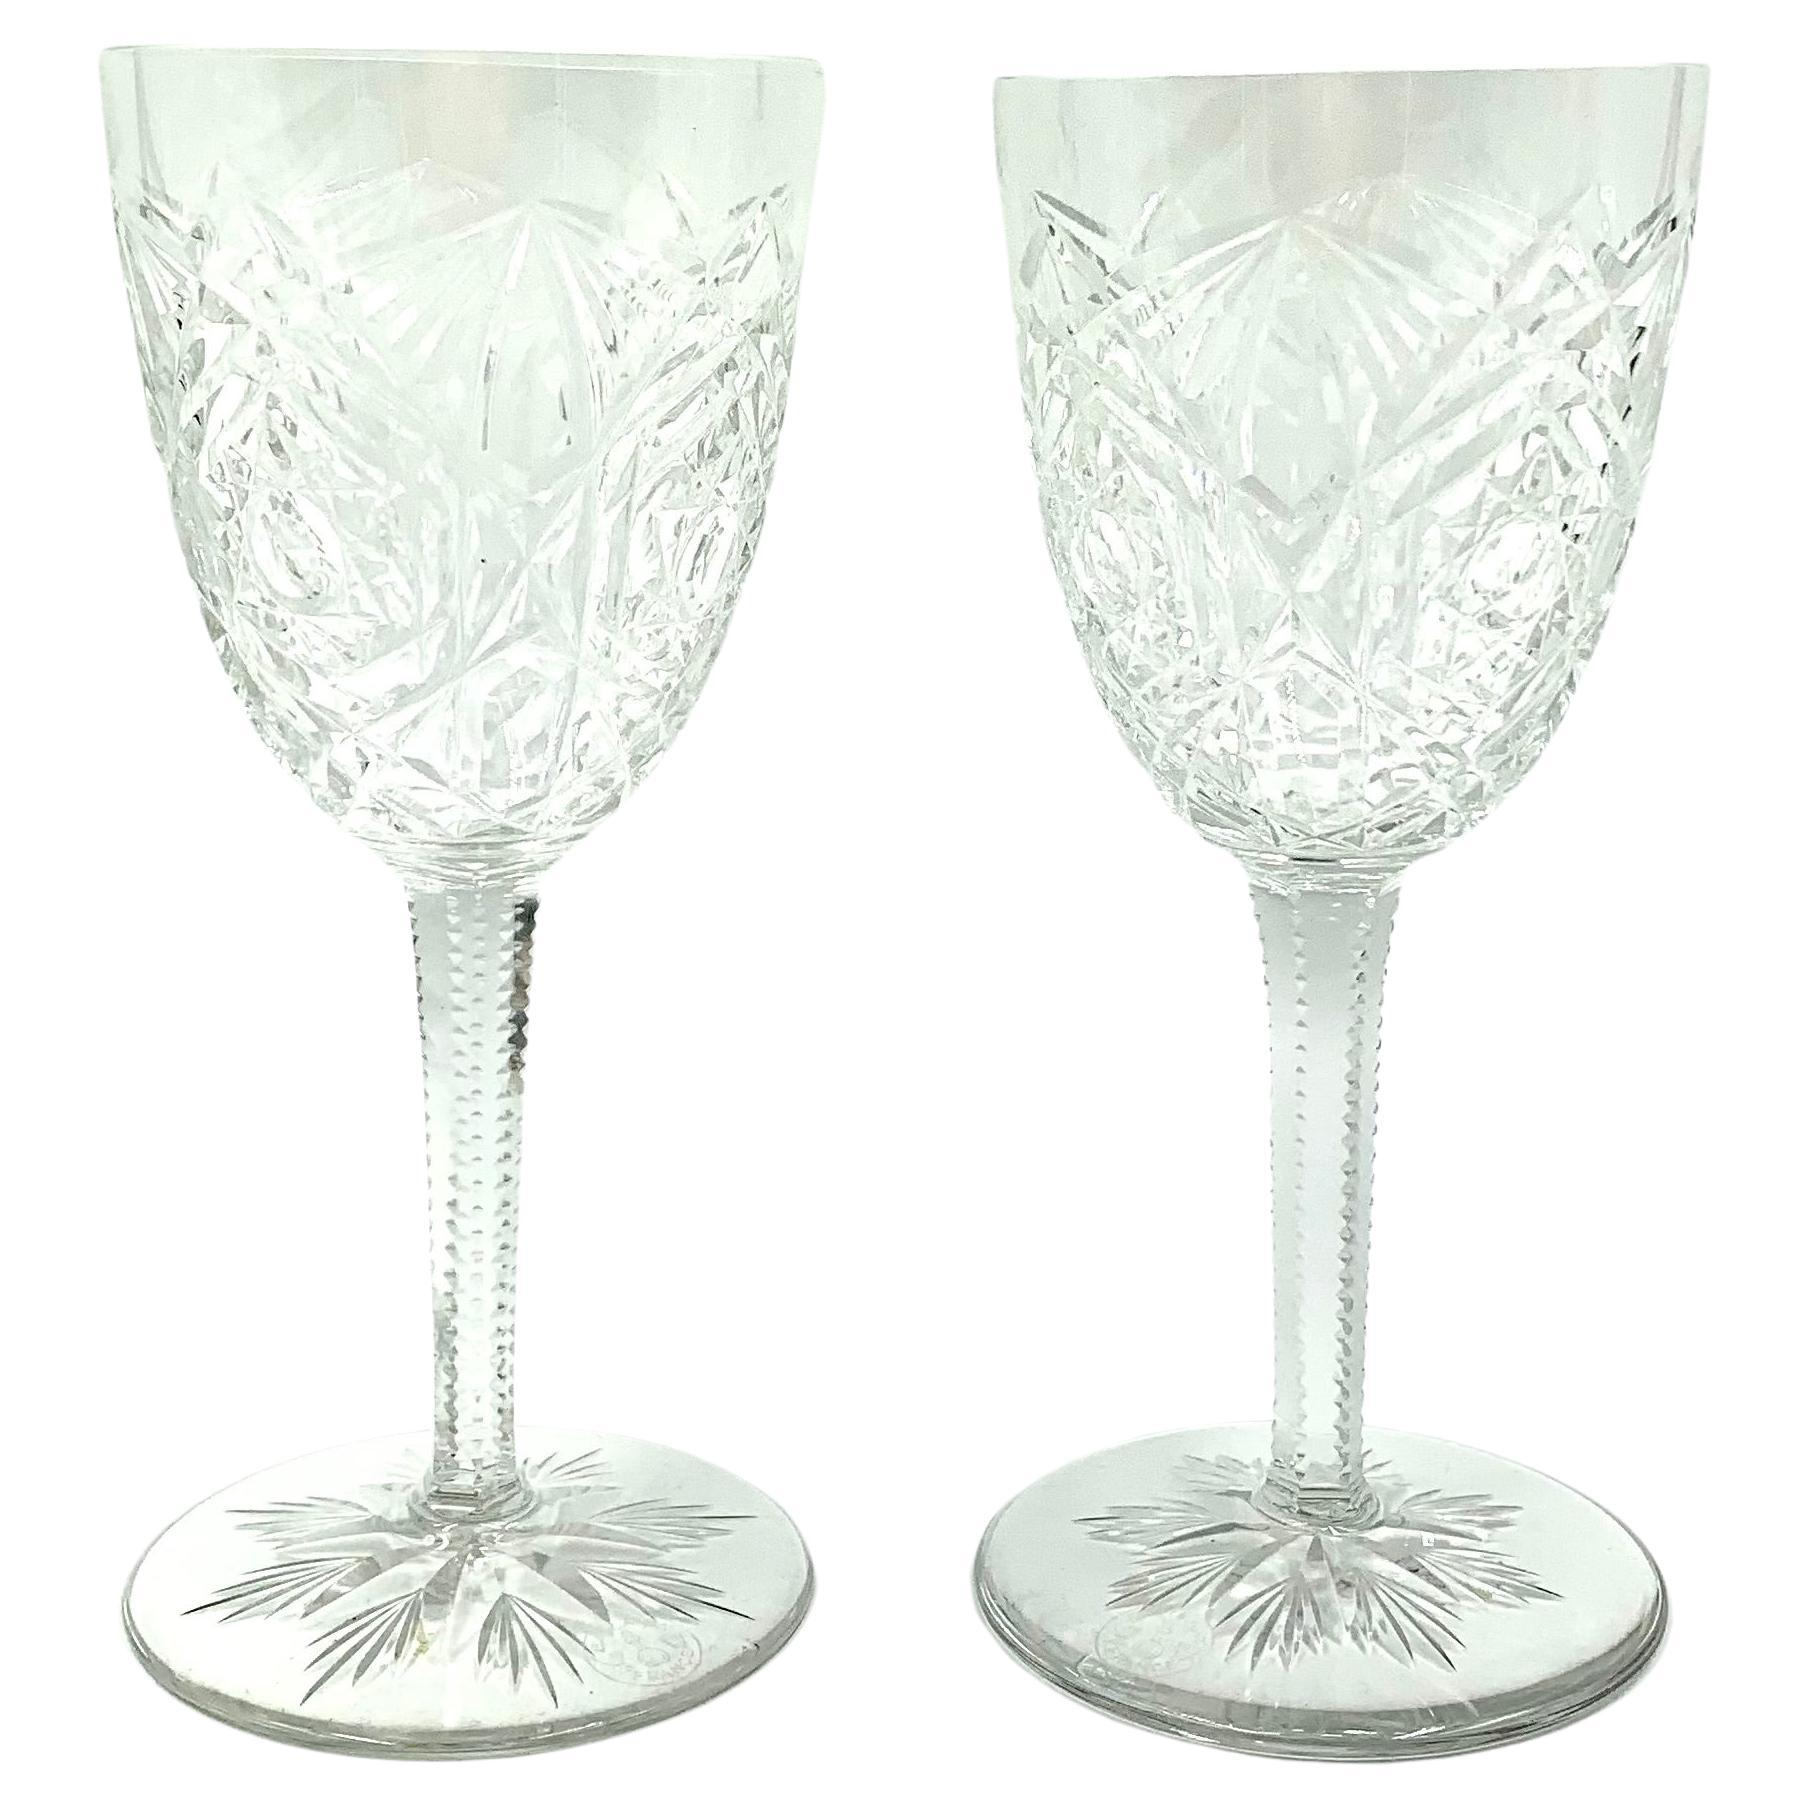 Luxurious Pair of Estate Baccarat Crystal Lagny Wine Glasses, Early 20th Century For Sale